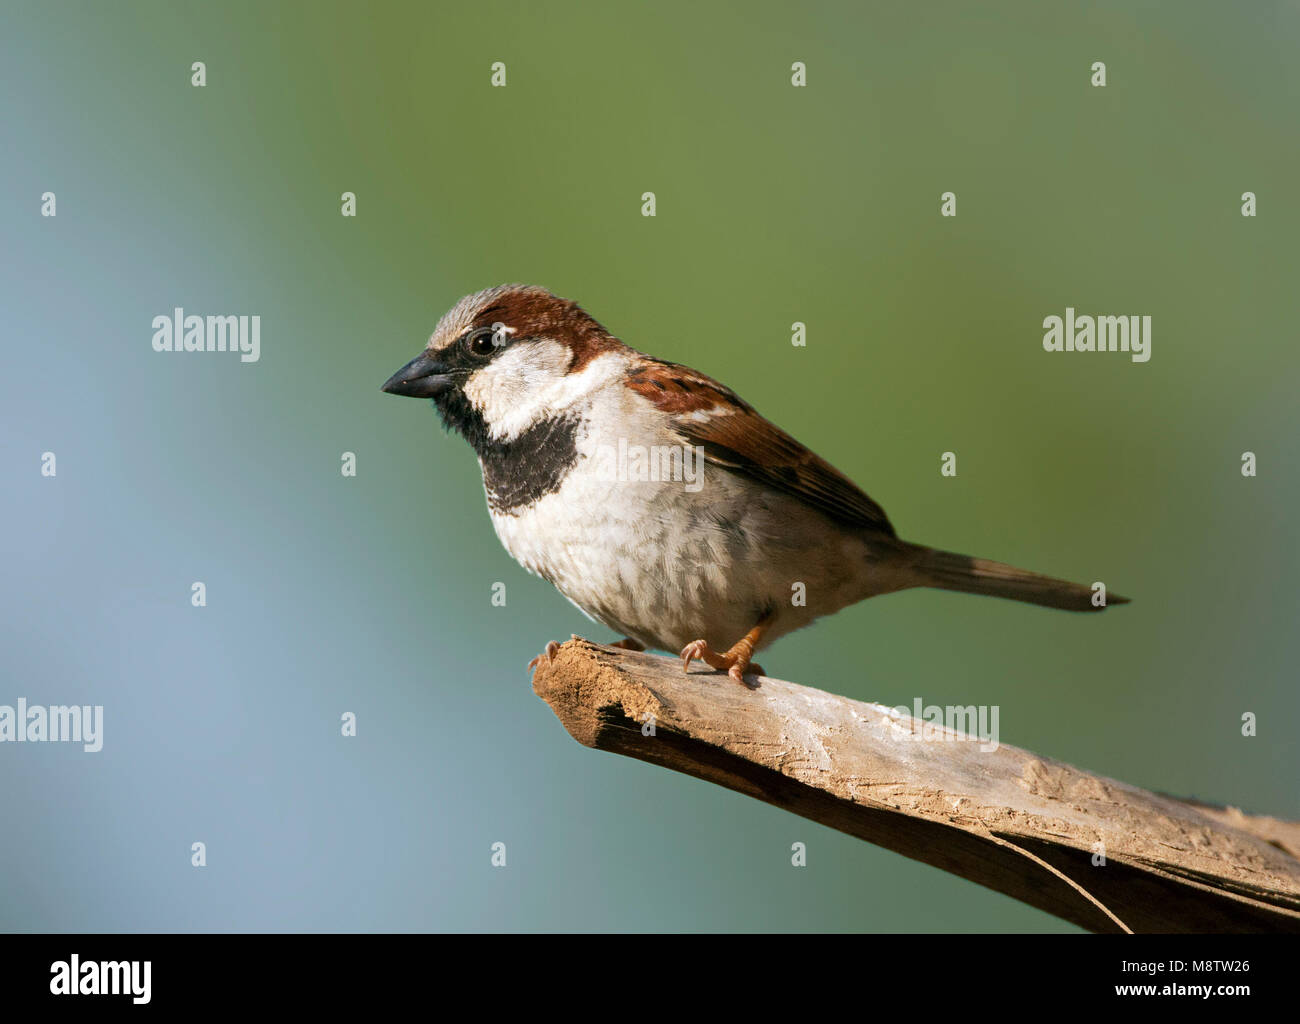 Huismus mannetje zittend op een palmtak in Eilat; House Sparrow male perched on a palm branch in Eilat (Israel) Stock Photo